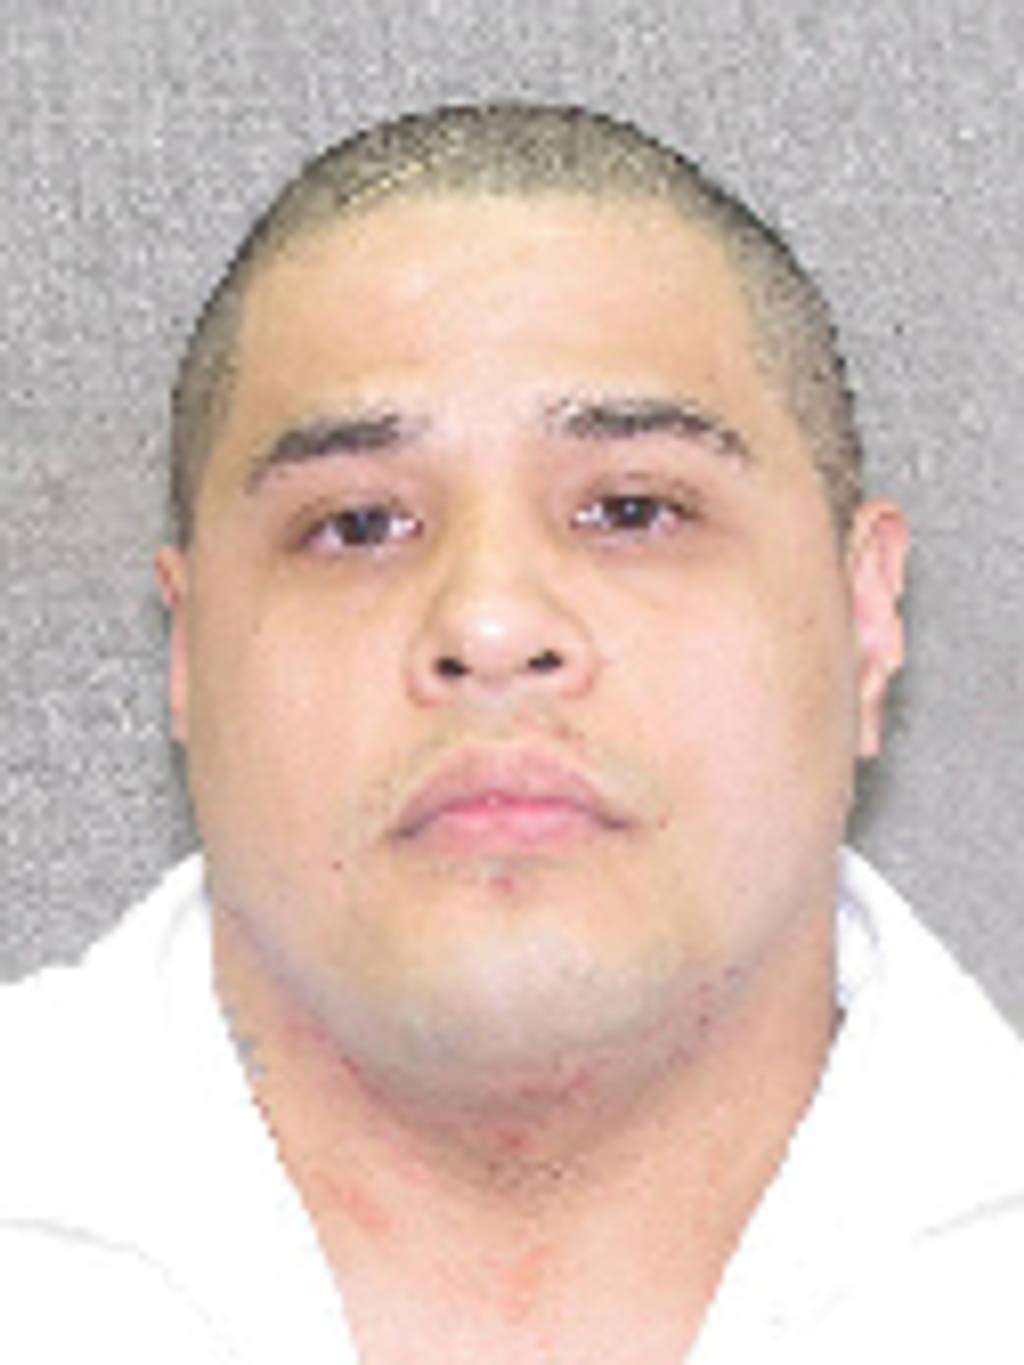 Texas Executes Prisoner with Fetal Alcohol Syndrome After Federal Appeals Court Denies Stay